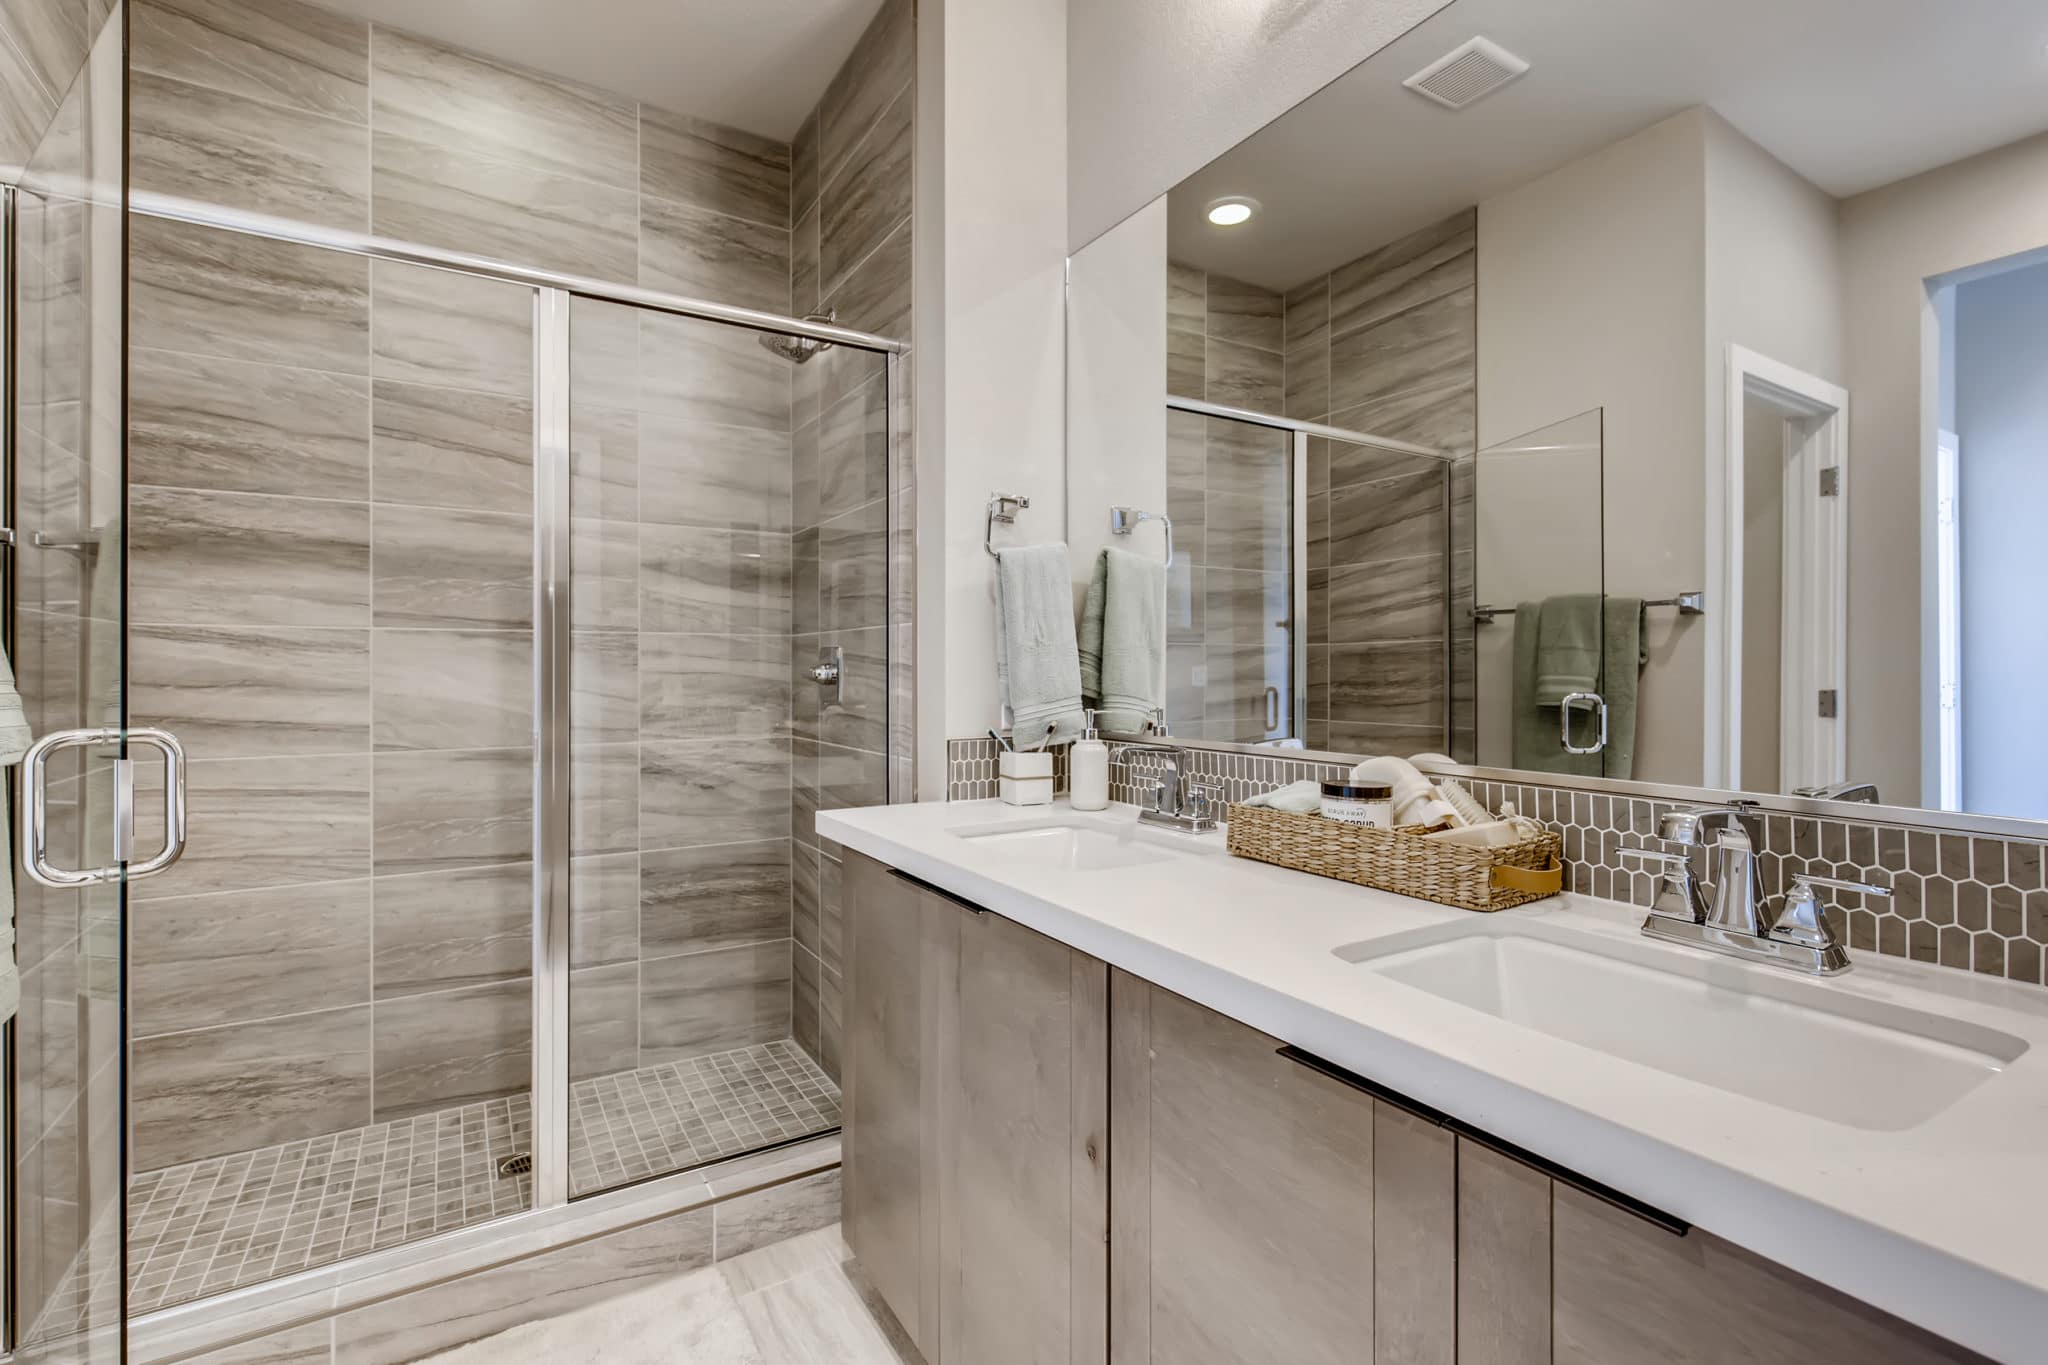 Bathroom of Amber Plan 3 at Obsidian by Woodside